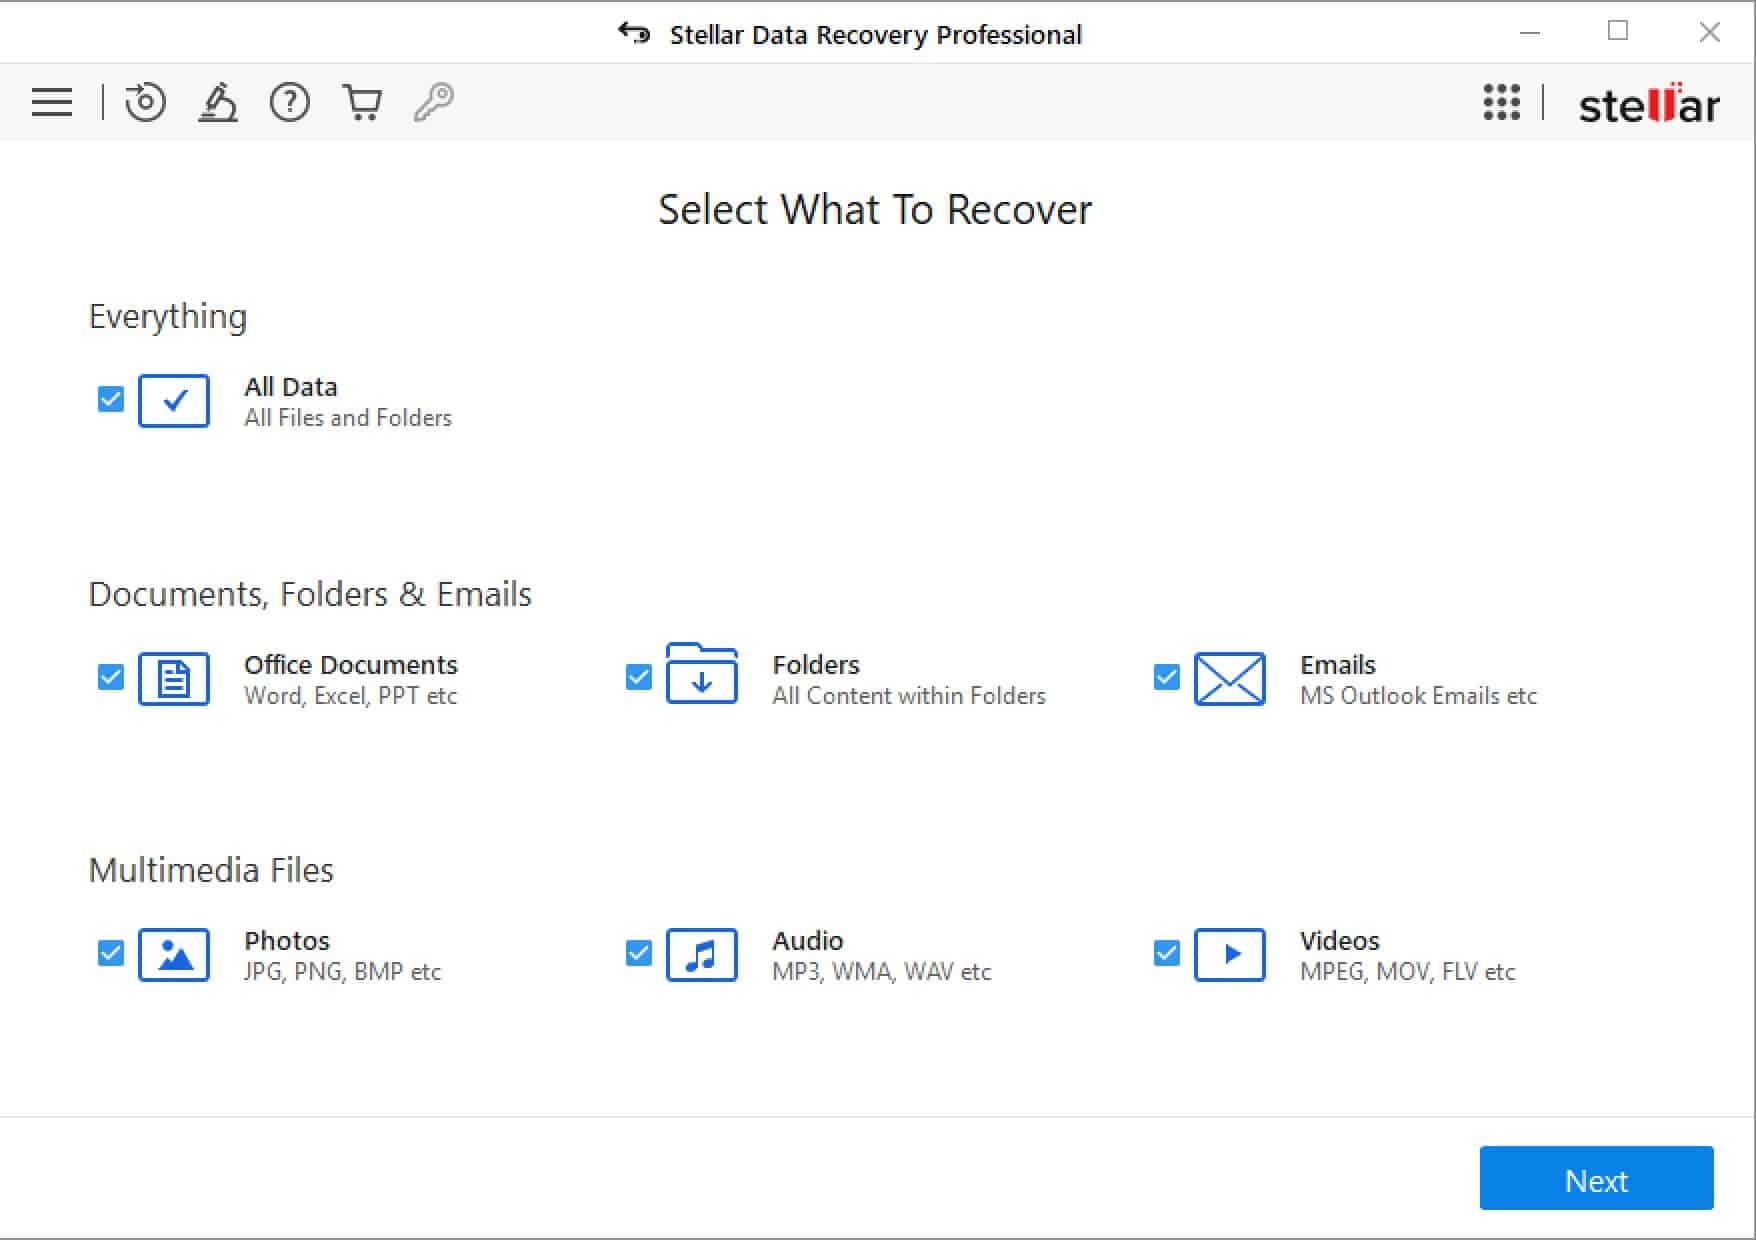 Stellar Data Recovery Windows - What to Recover